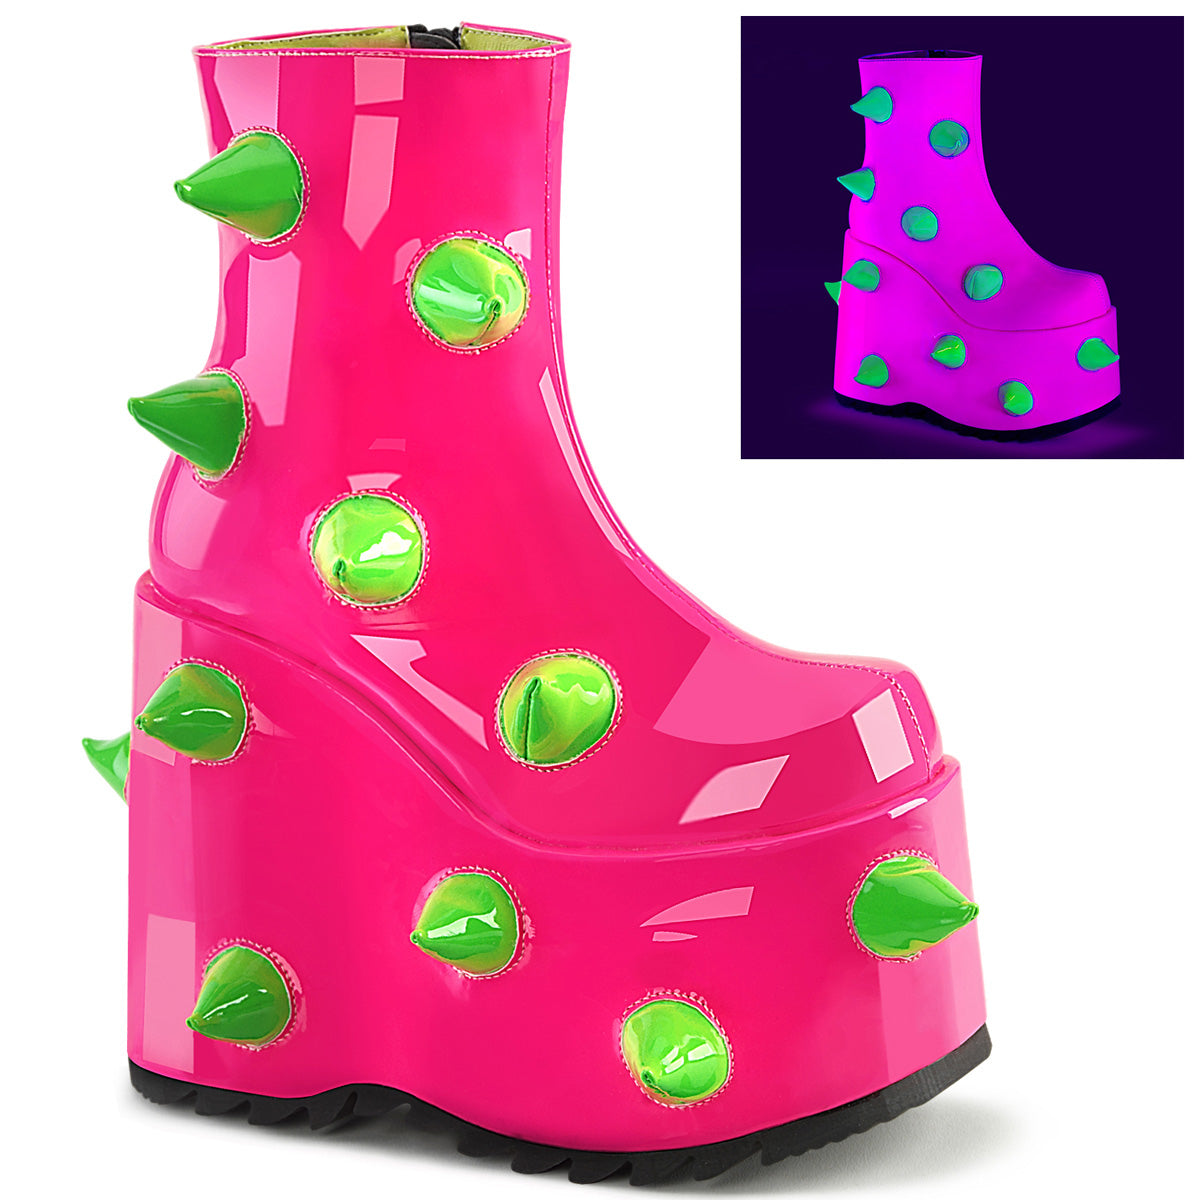 DemoniaCult  Ankle Boots SLAY-77 UV Neon Pink-Neon Green